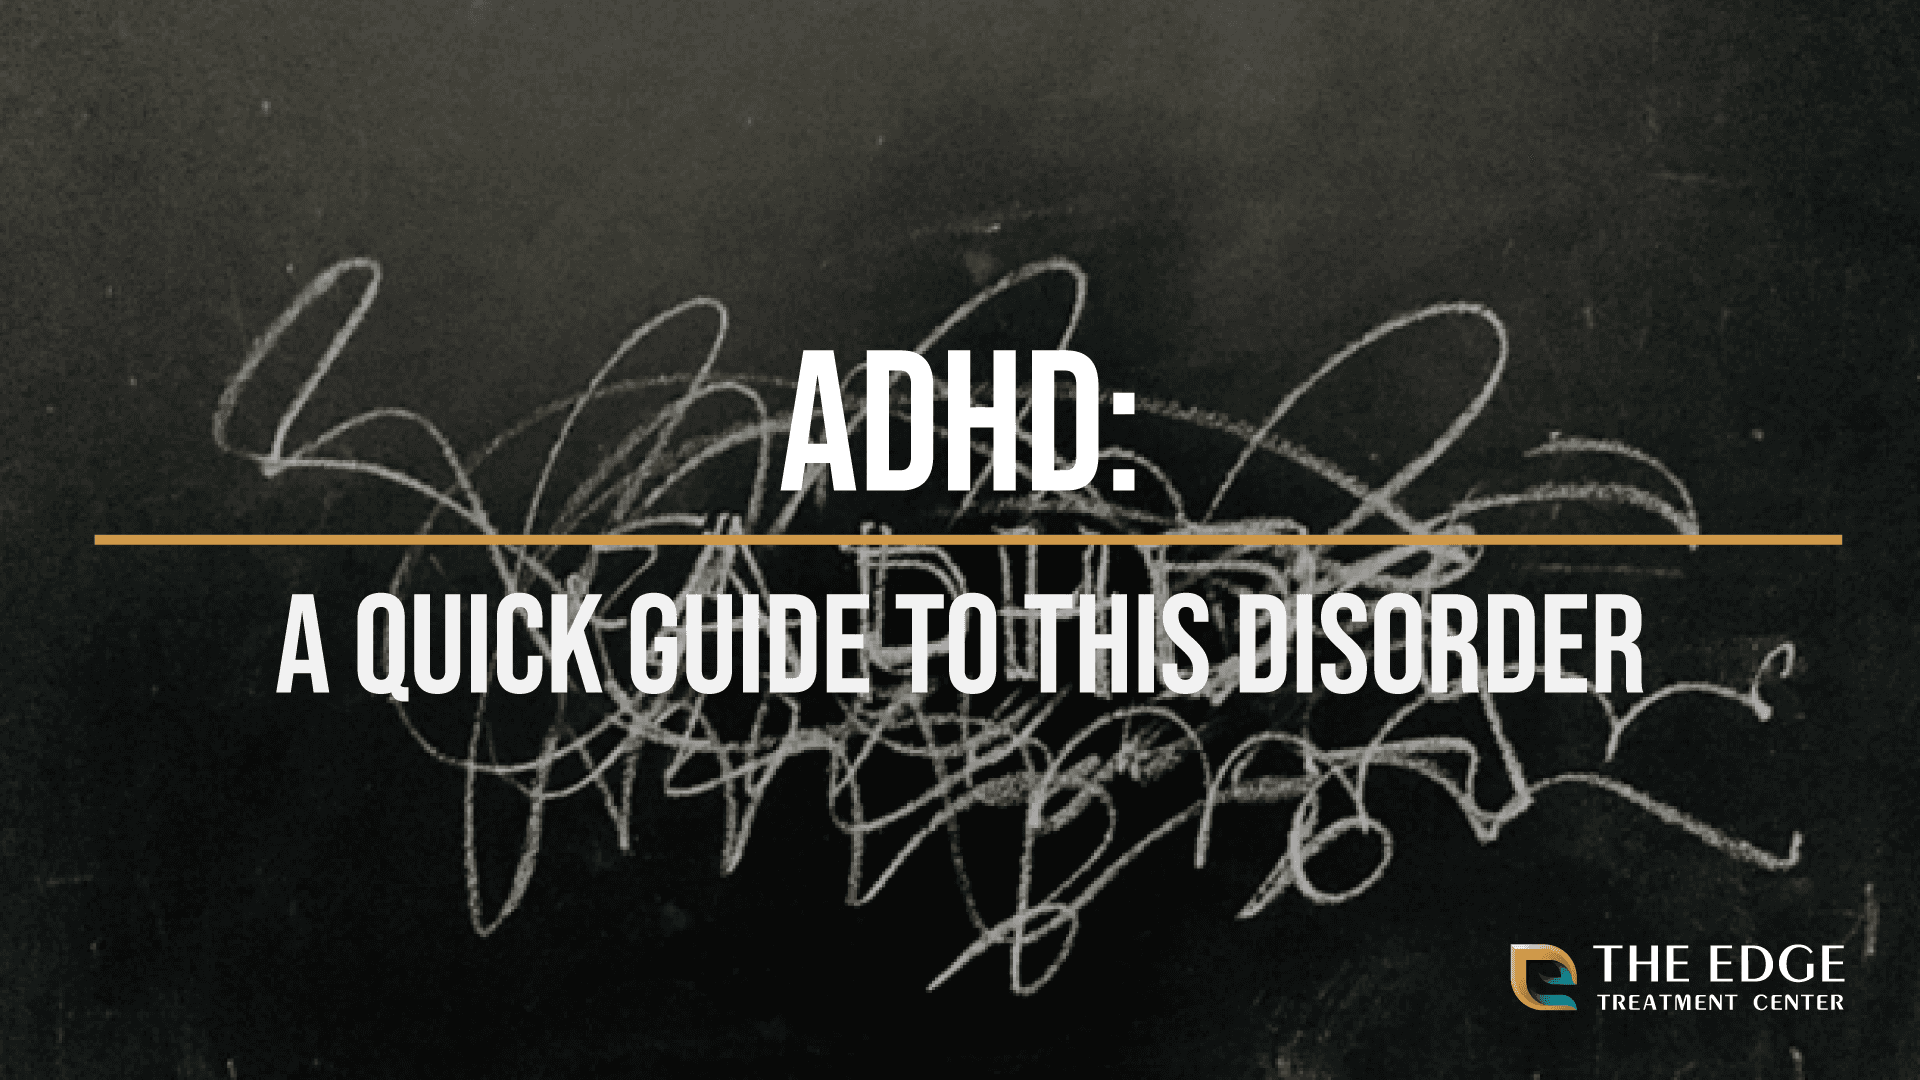 What Do You Know About ADHD?